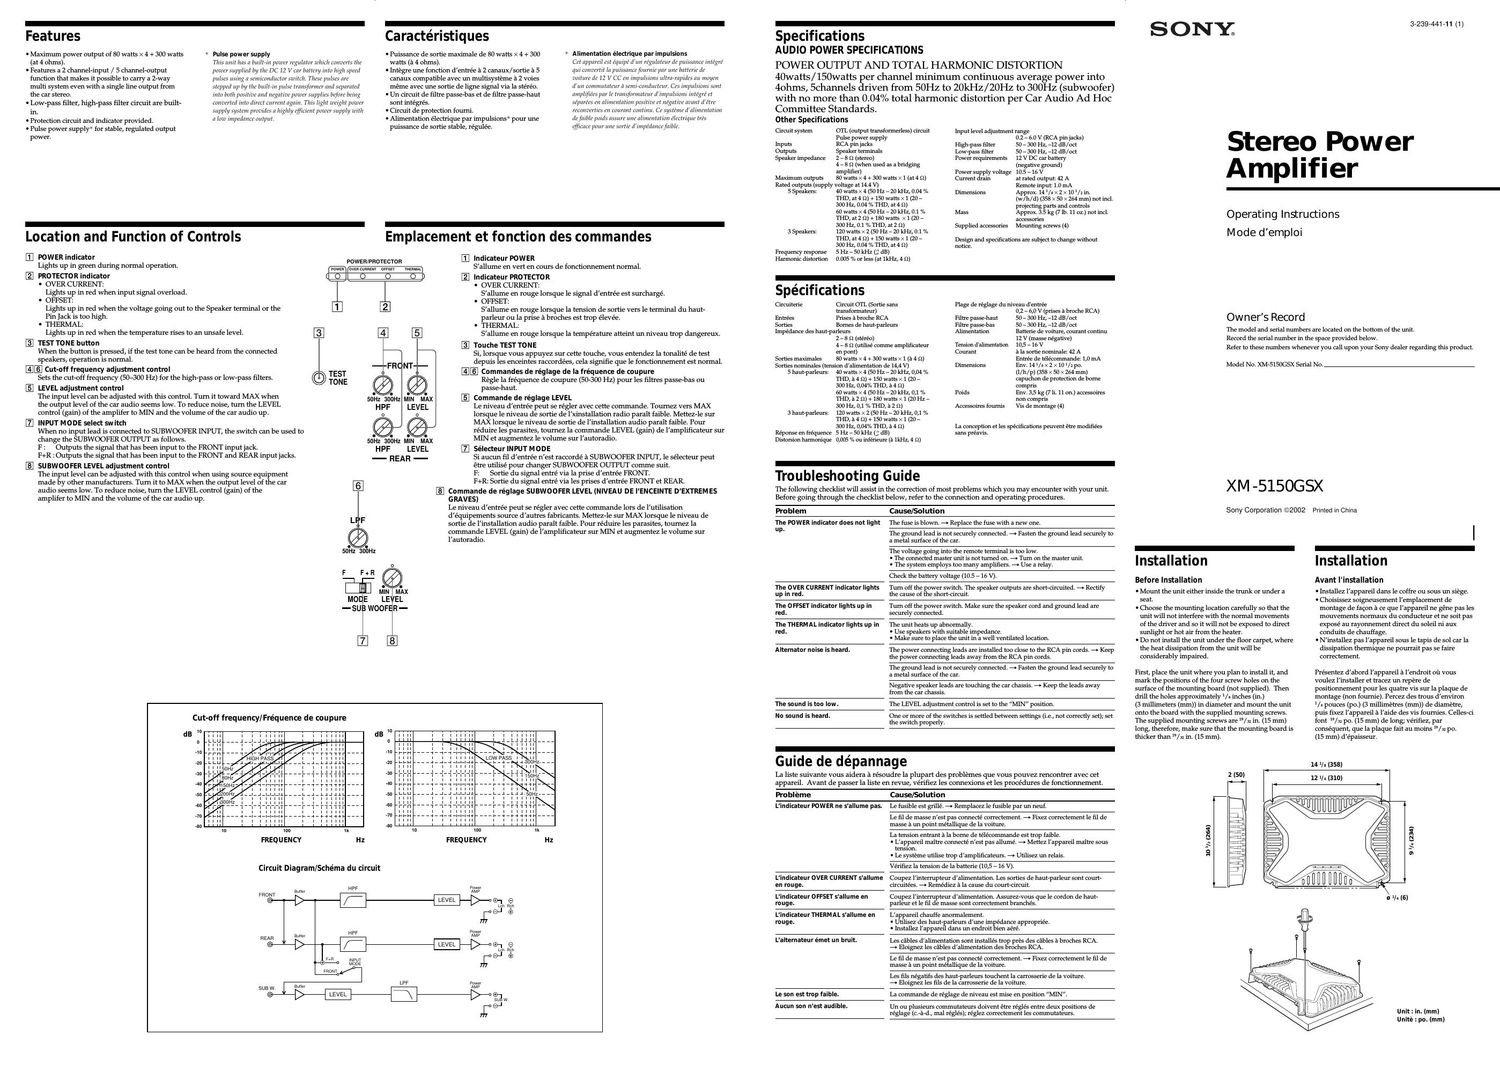 sony xm 5150 gsx owners manual